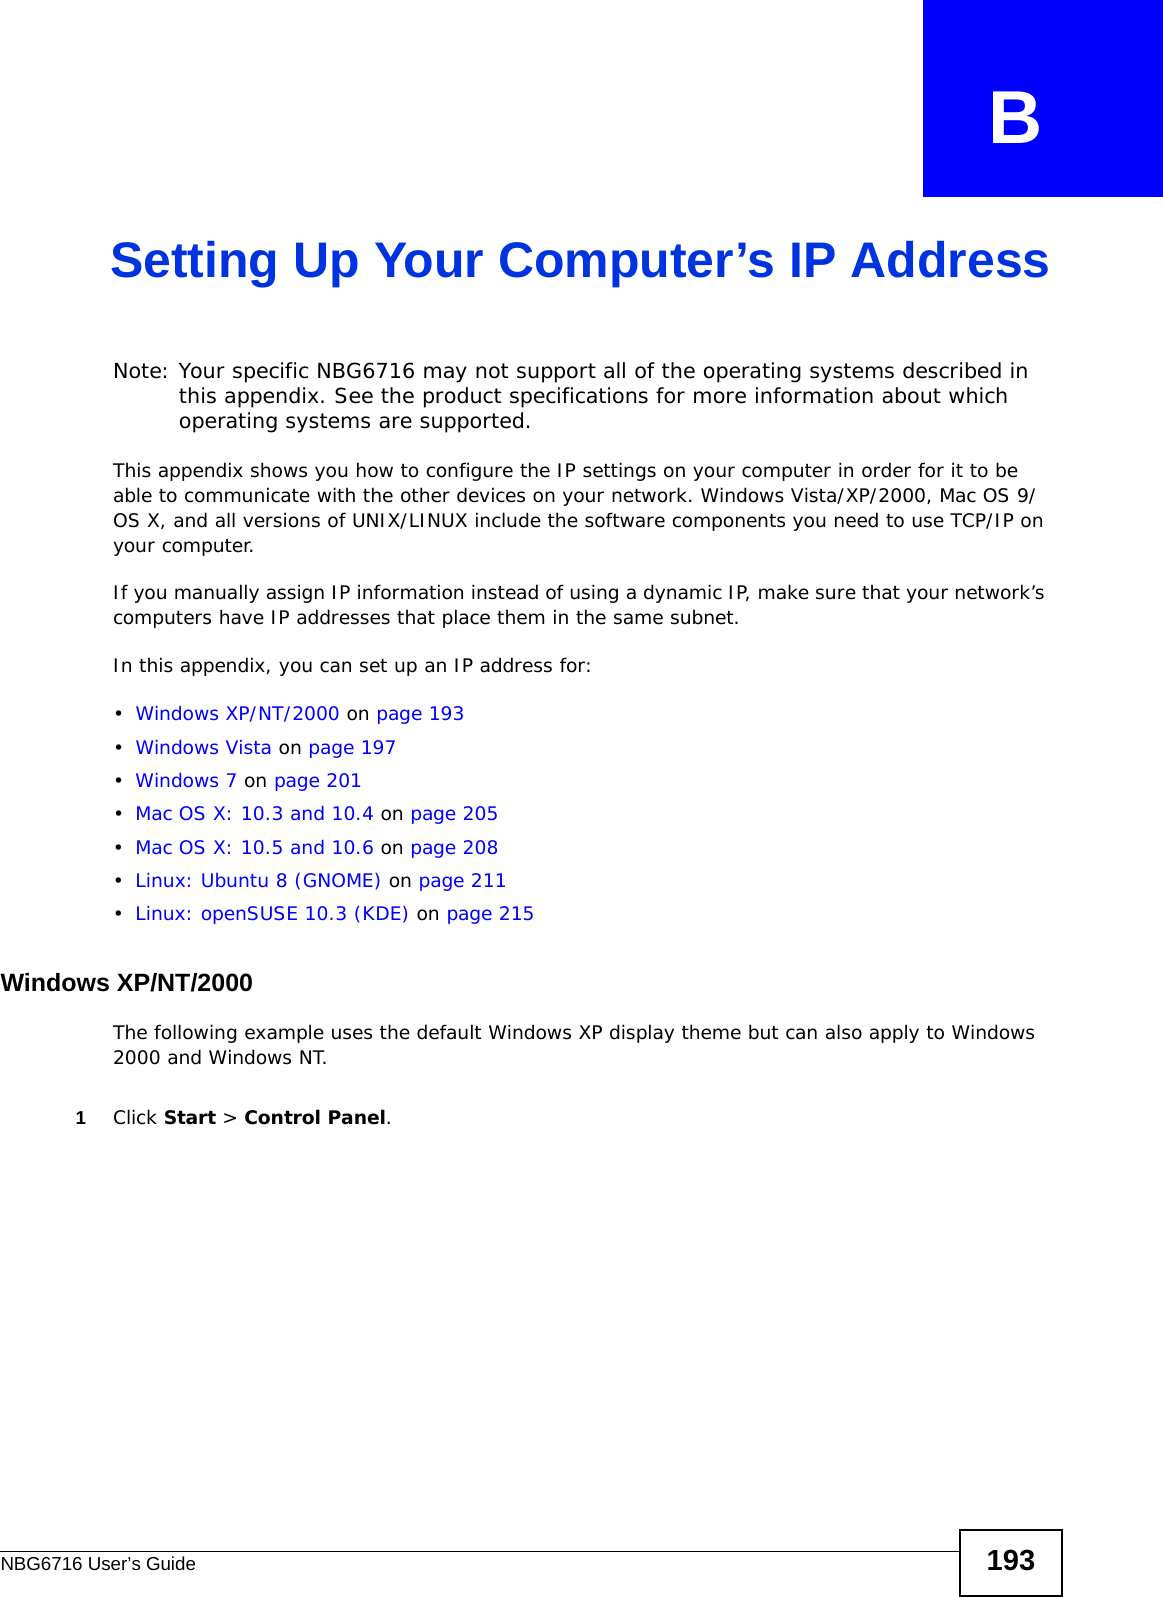 NBG6716 User’s Guide 193APPENDIX   BSetting Up Your Computer’s IP AddressNote: Your specific NBG6716 may not support all of the operating systems described in this appendix. See the product specifications for more information about which operating systems are supported.This appendix shows you how to configure the IP settings on your computer in order for it to be able to communicate with the other devices on your network. Windows Vista/XP/2000, Mac OS 9/OS X, and all versions of UNIX/LINUX include the software components you need to use TCP/IP on your computer. If you manually assign IP information instead of using a dynamic IP, make sure that your network’s computers have IP addresses that place them in the same subnet.In this appendix, you can set up an IP address for:•Windows XP/NT/2000 on page 193•Windows Vista on page 197•Windows 7 on page 201•Mac OS X: 10.3 and 10.4 on page 205•Mac OS X: 10.5 and 10.6 on page 208•Linux: Ubuntu 8 (GNOME) on page 211•Linux: openSUSE 10.3 (KDE) on page 215Windows XP/NT/2000The following example uses the default Windows XP display theme but can also apply to Windows 2000 and Windows NT.1Click Start &gt; Control Panel.